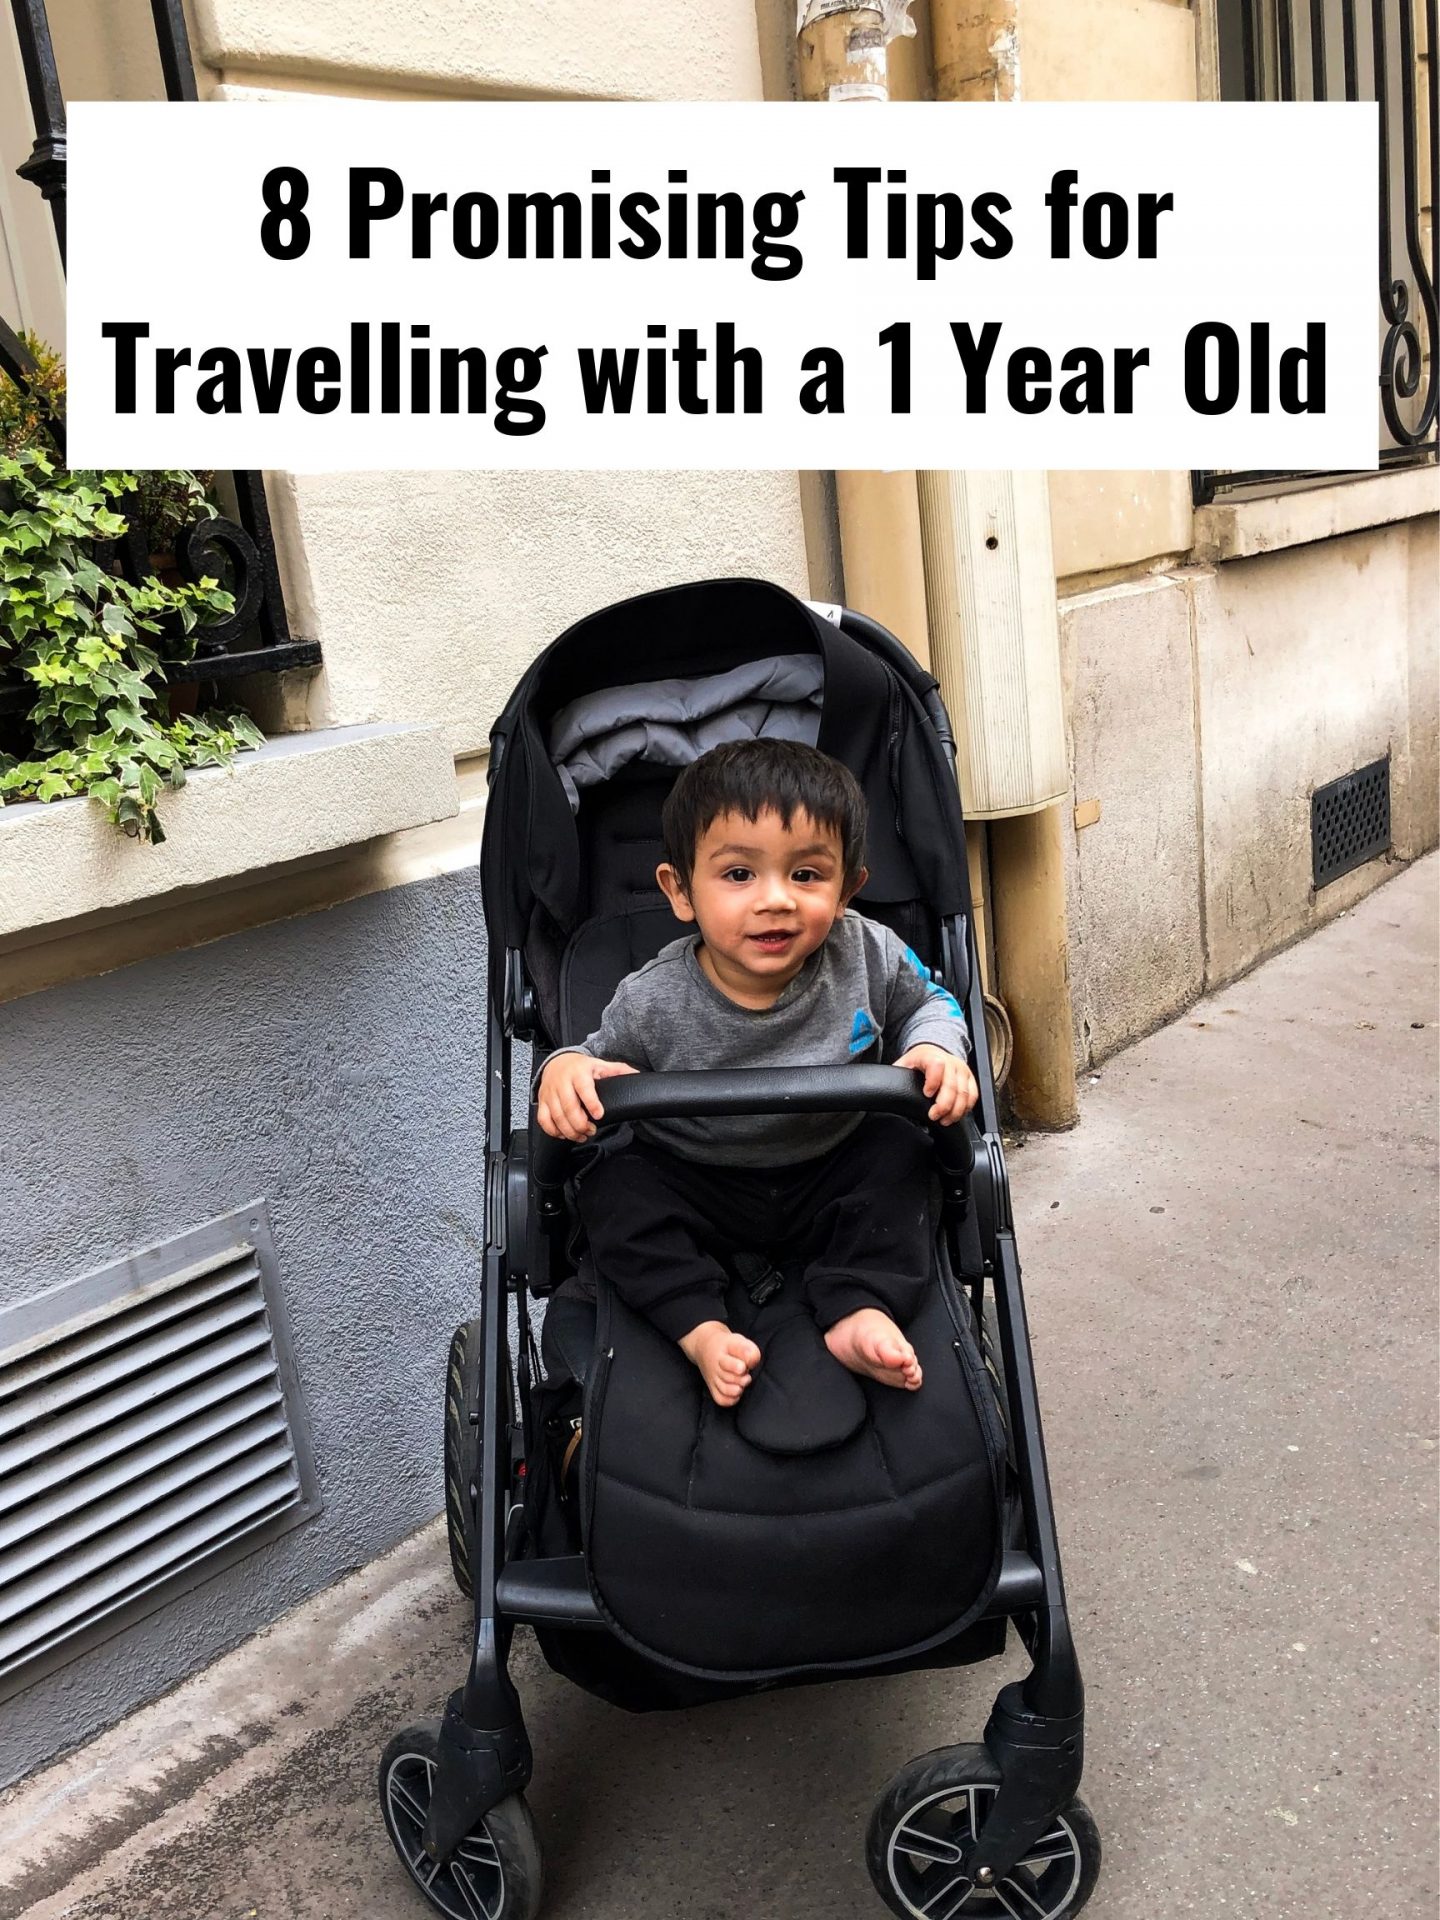 travel tips with one year old